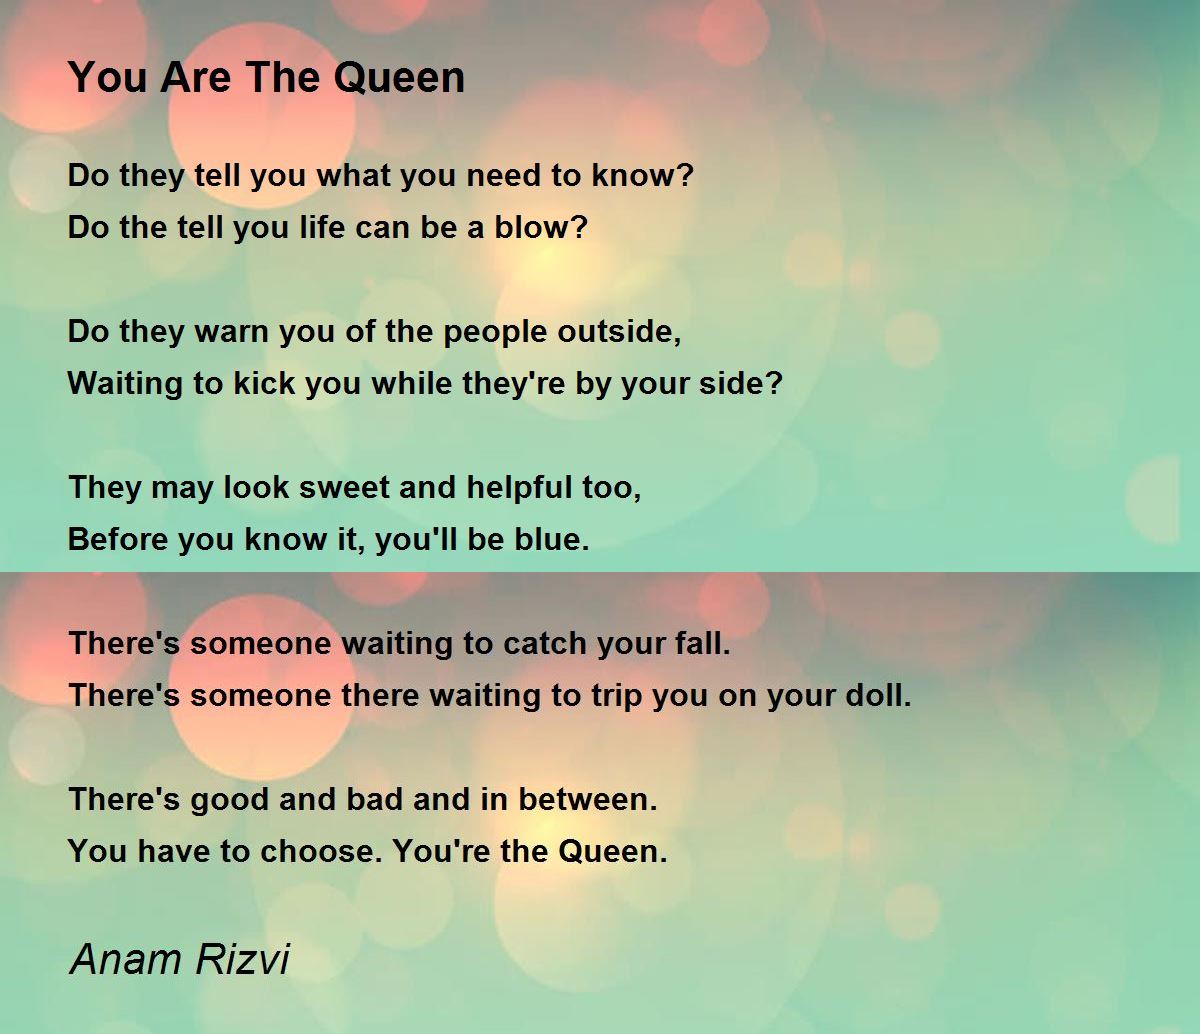 You Are The Queen - You Are The Queen Poem by Anam Rizvi